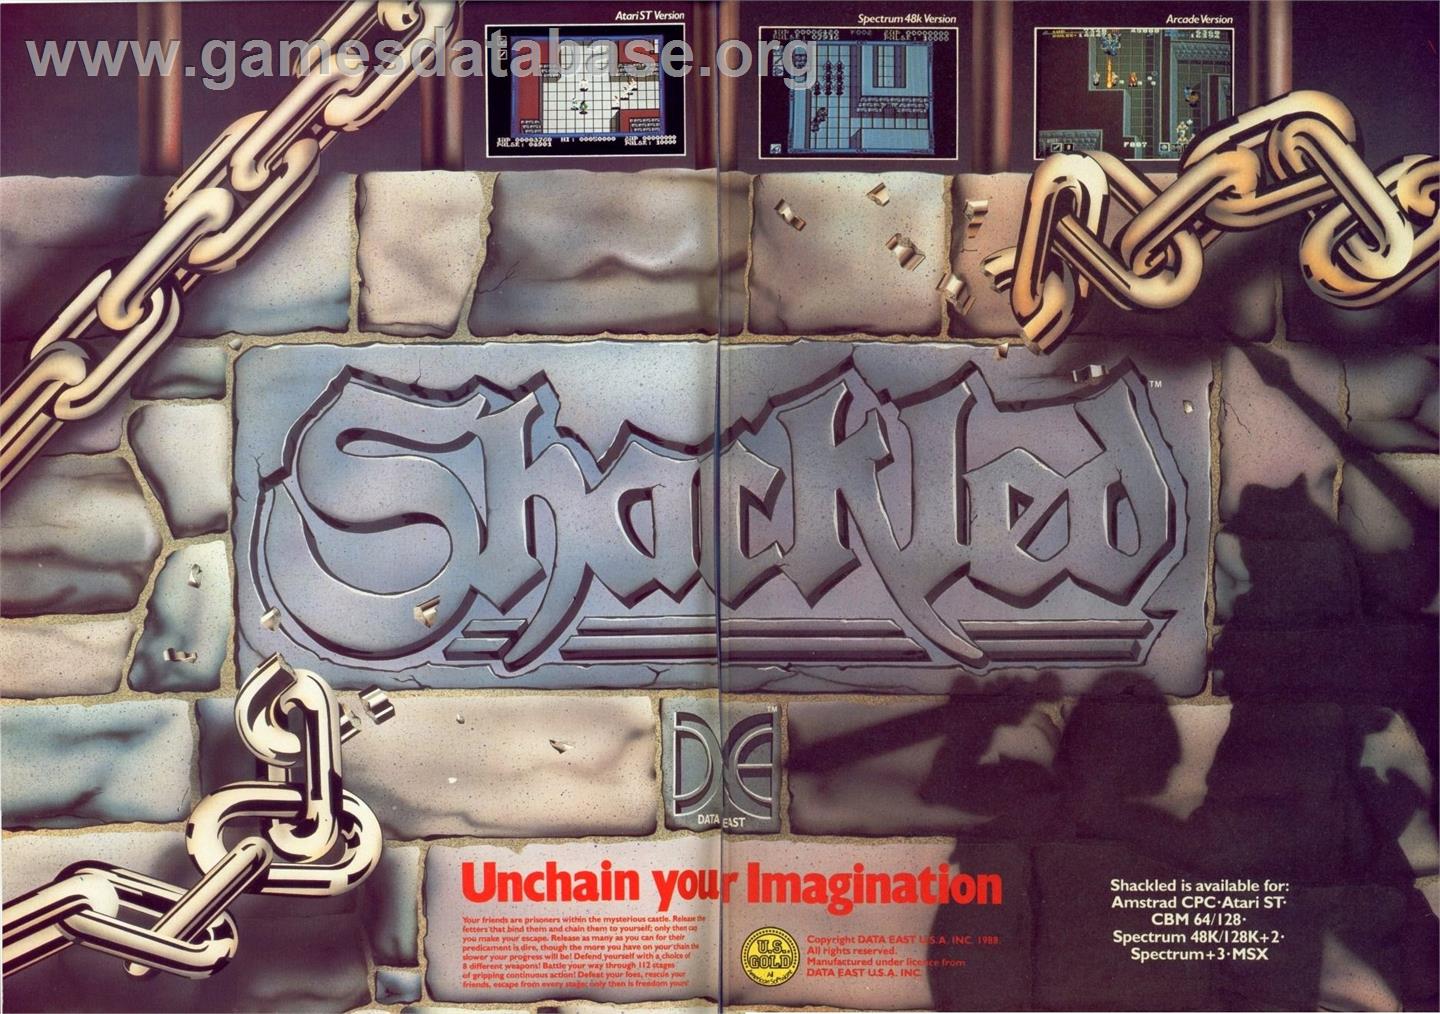 Shackled - Commodore 64 - Artwork - Advert